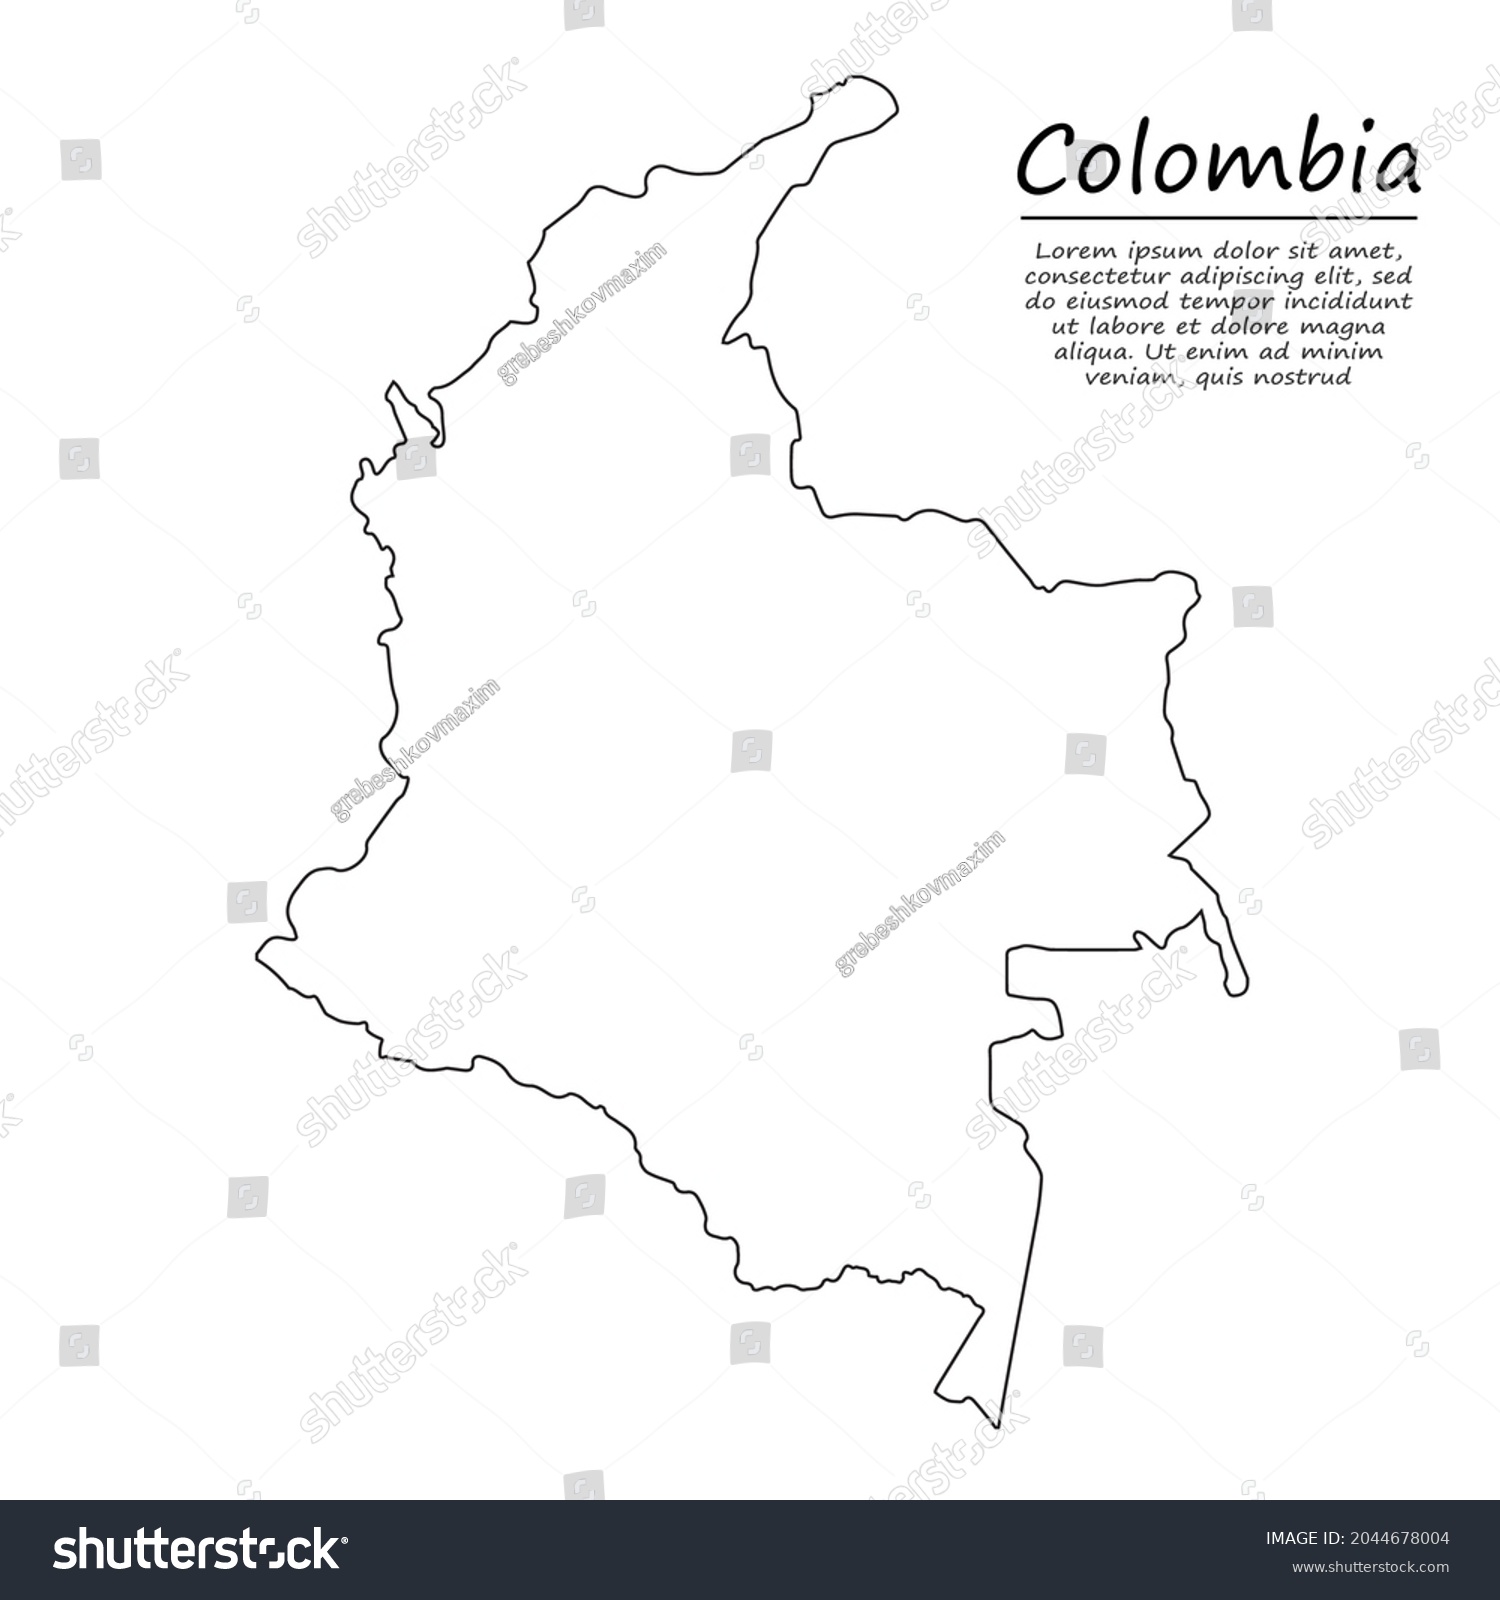 Simple Outline Map Colombia Vector Silhouette เวกเตอร์สต็อก ปลอดค่า